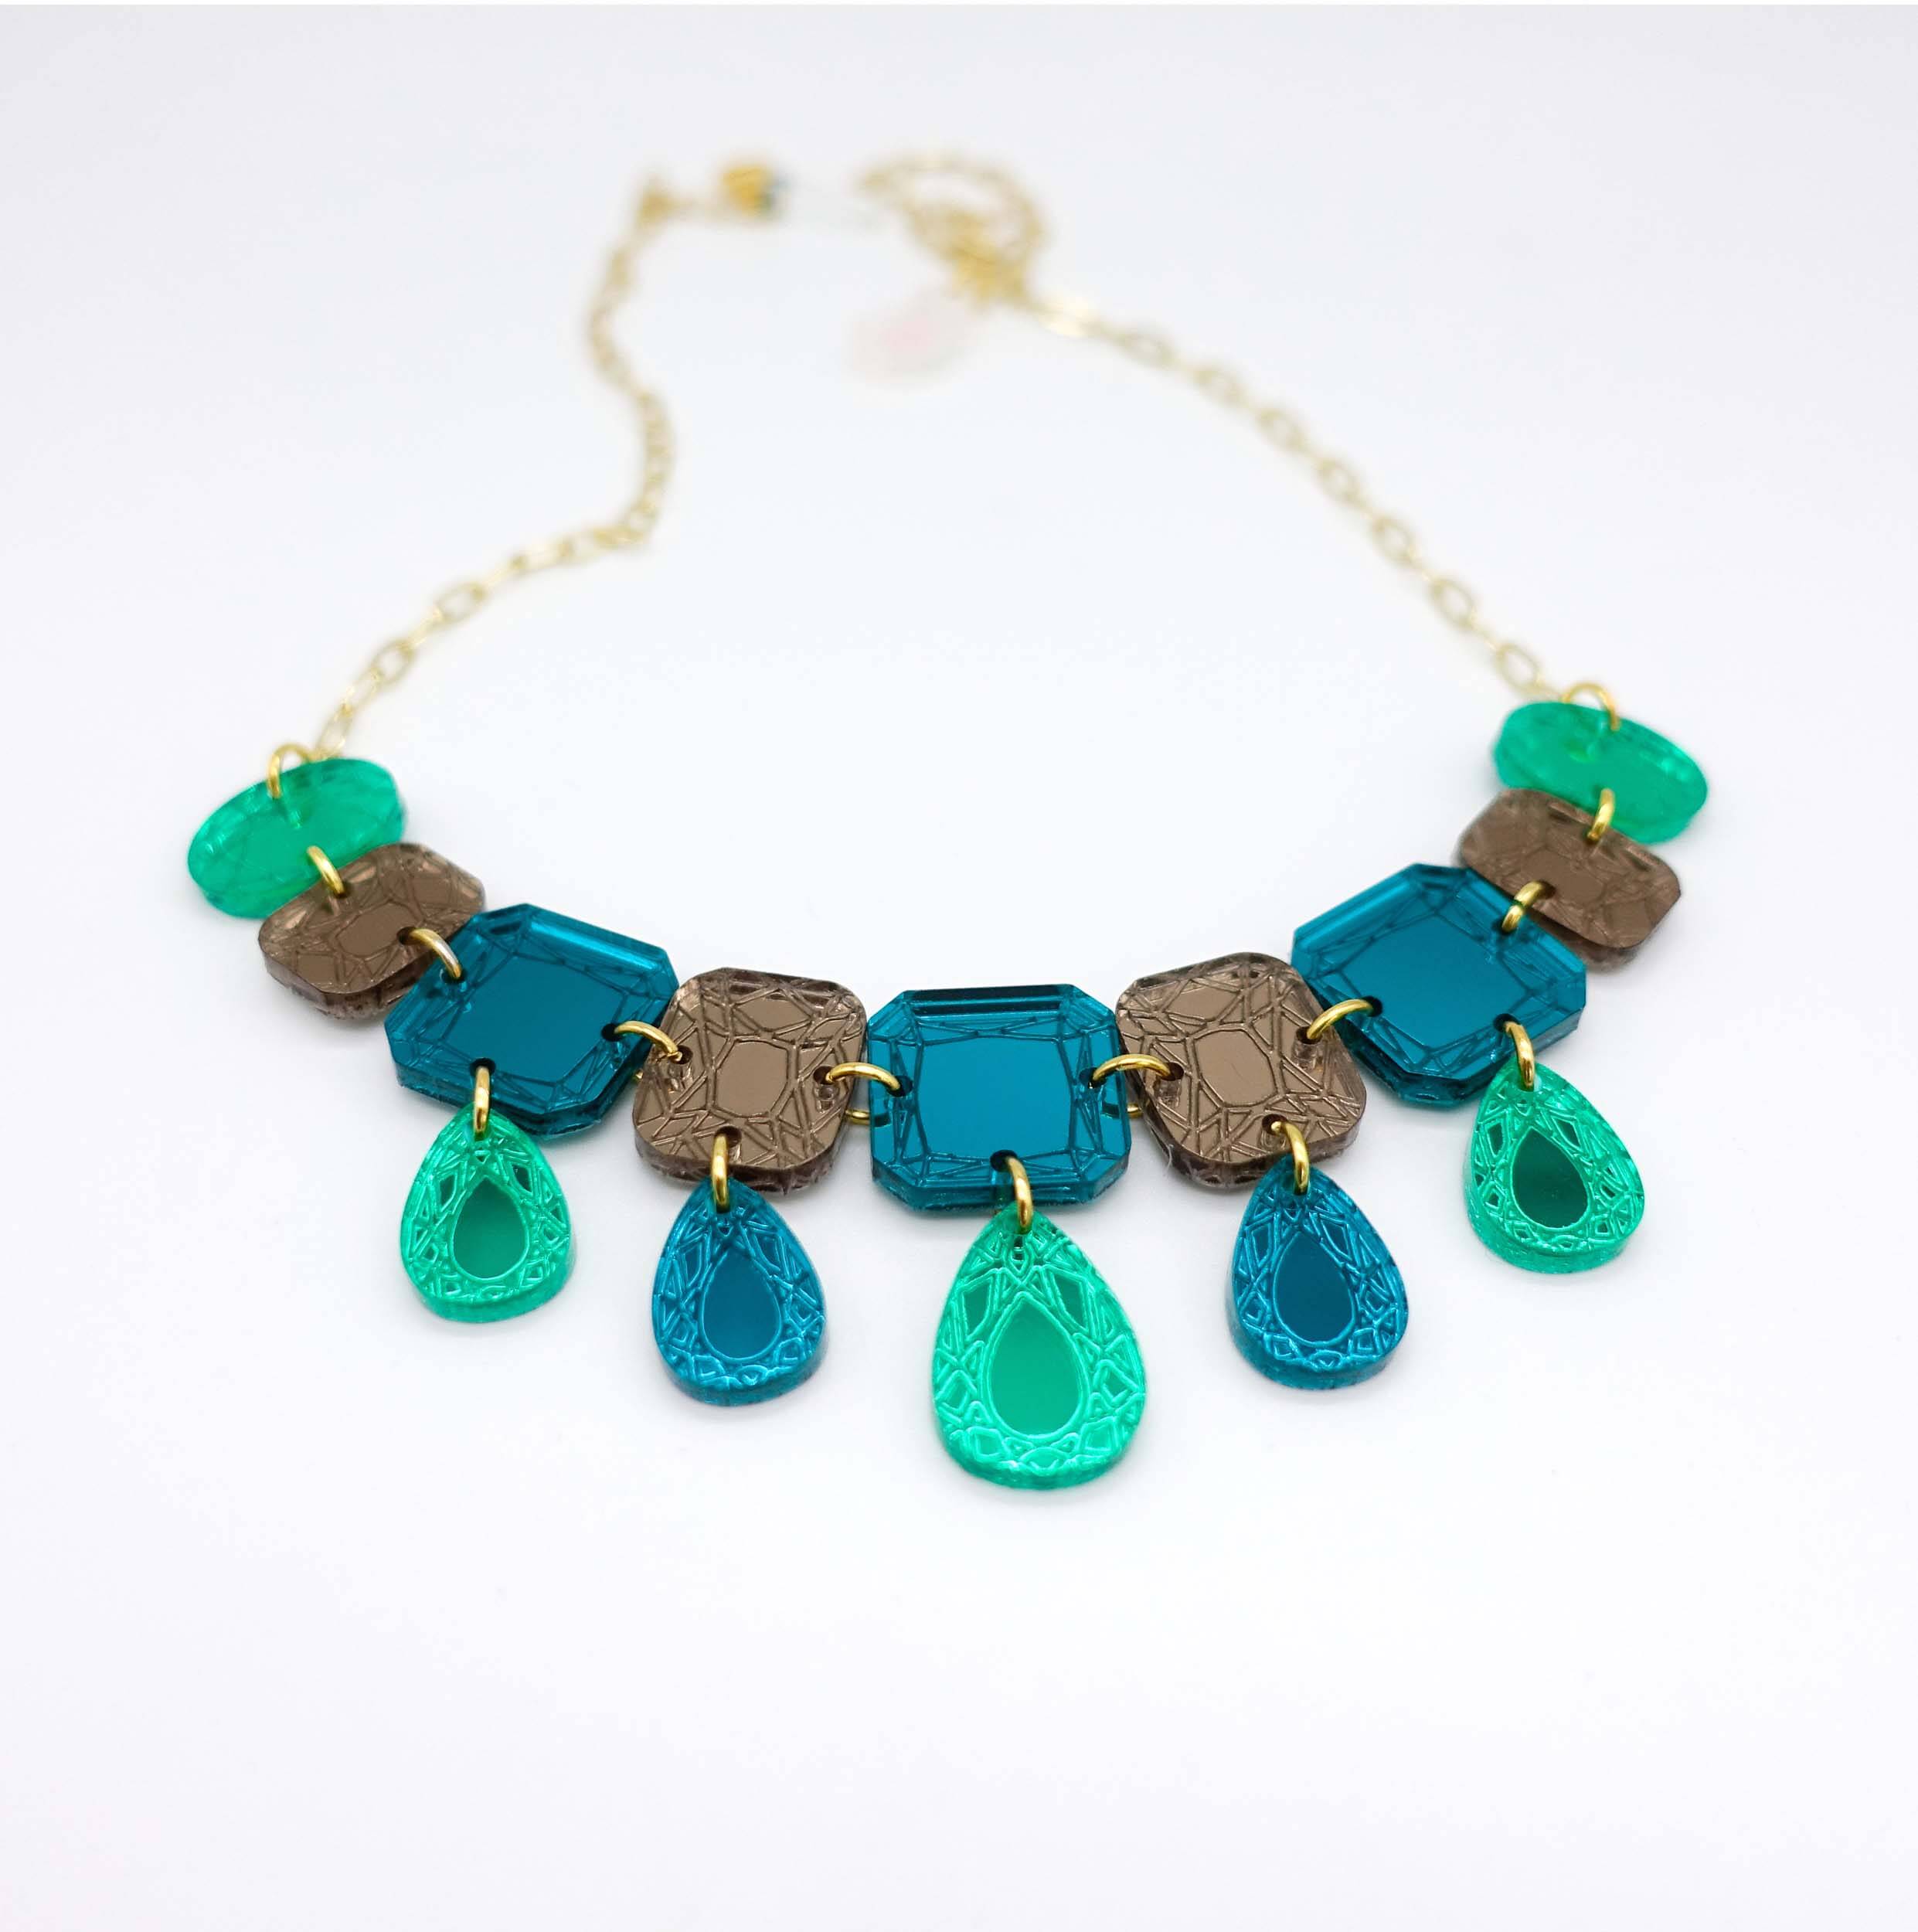 Austerity jewels necklace in teal époquecolours, designed by Sarah Day for Wear and Resist. £2 goes to Women for Refugee Women. Bling for Brexit Britain! Recession chic. 